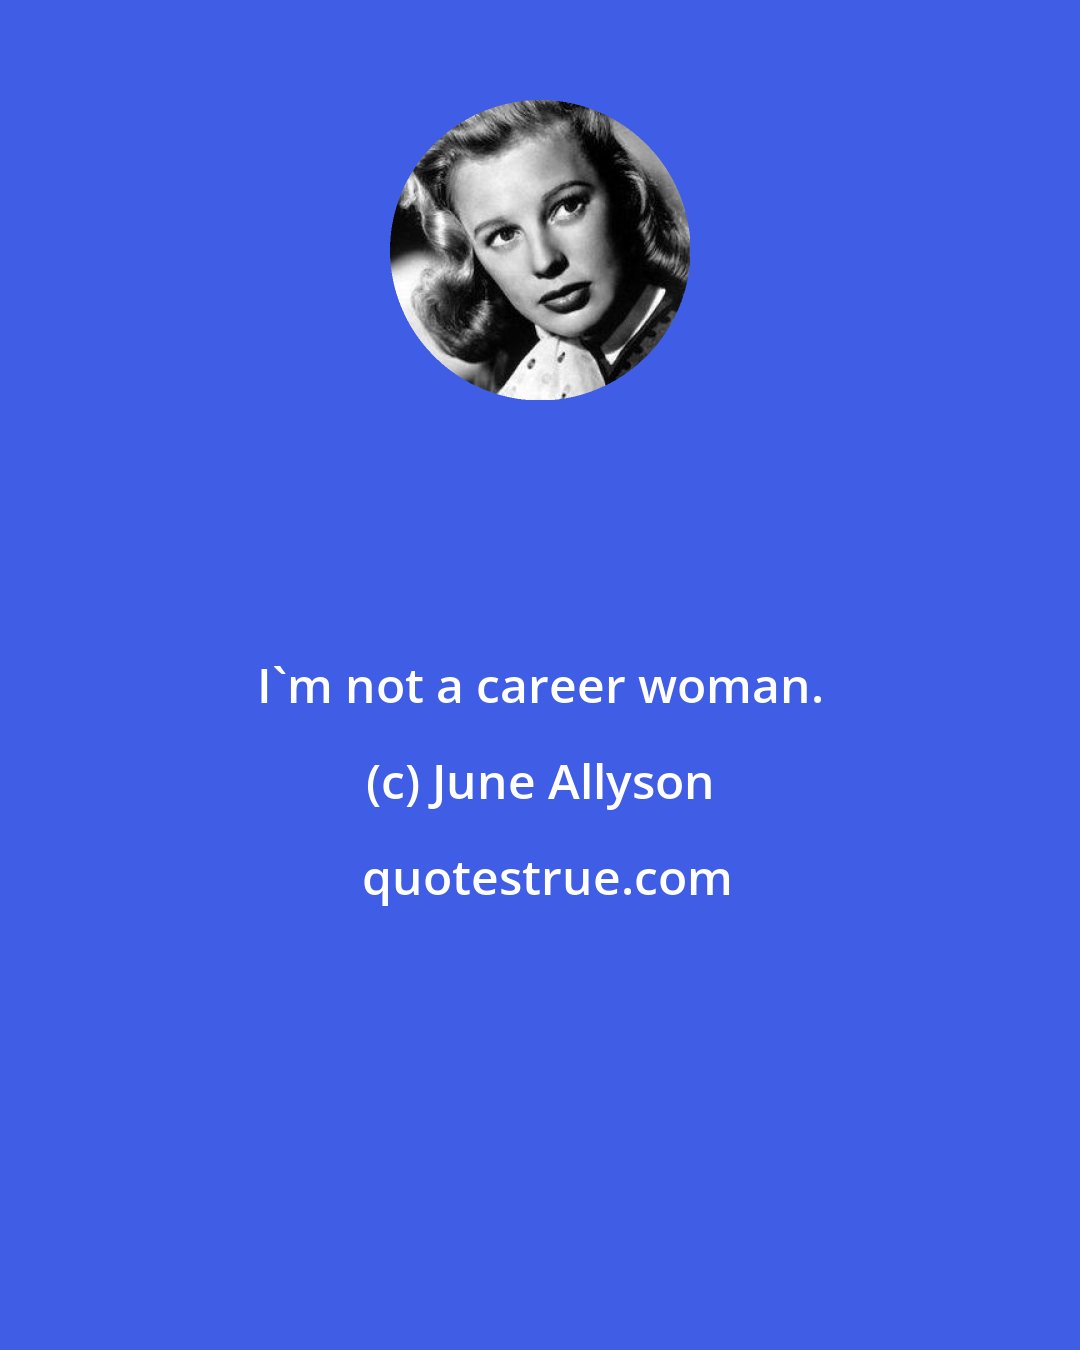 June Allyson: I'm not a career woman.